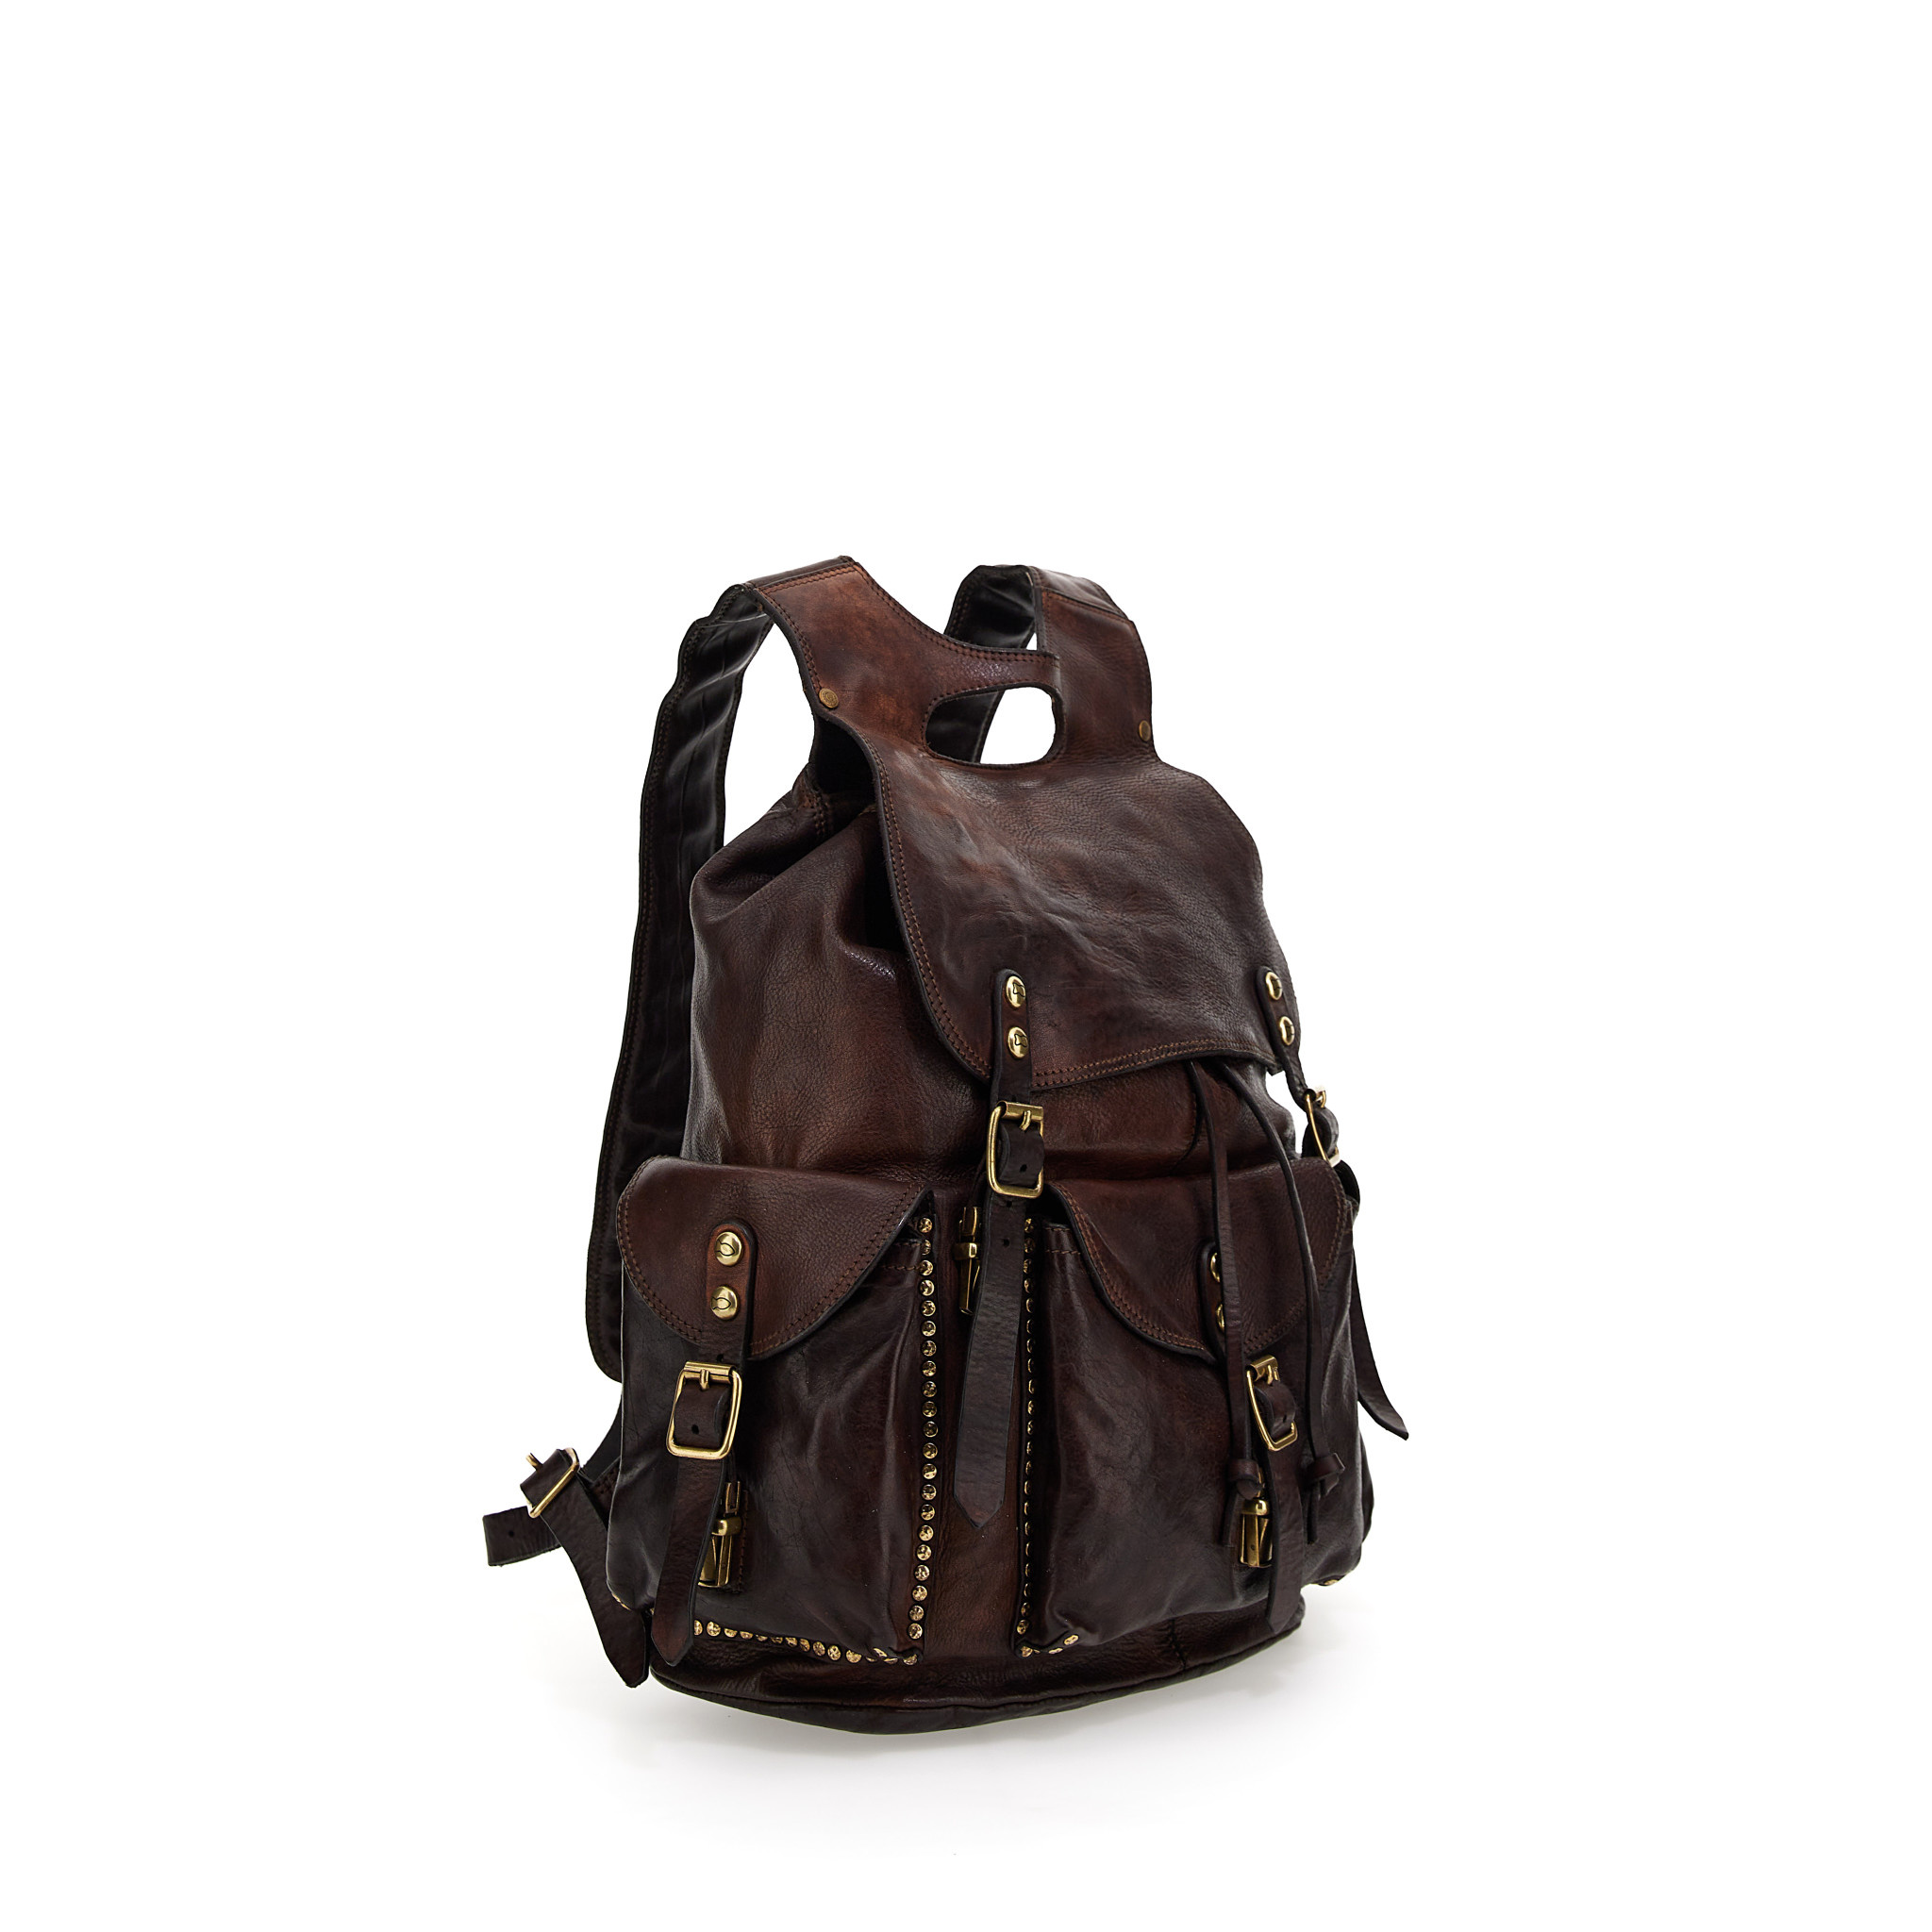 Campomaggi Backpack. Leather + Studs. P/D Moro.